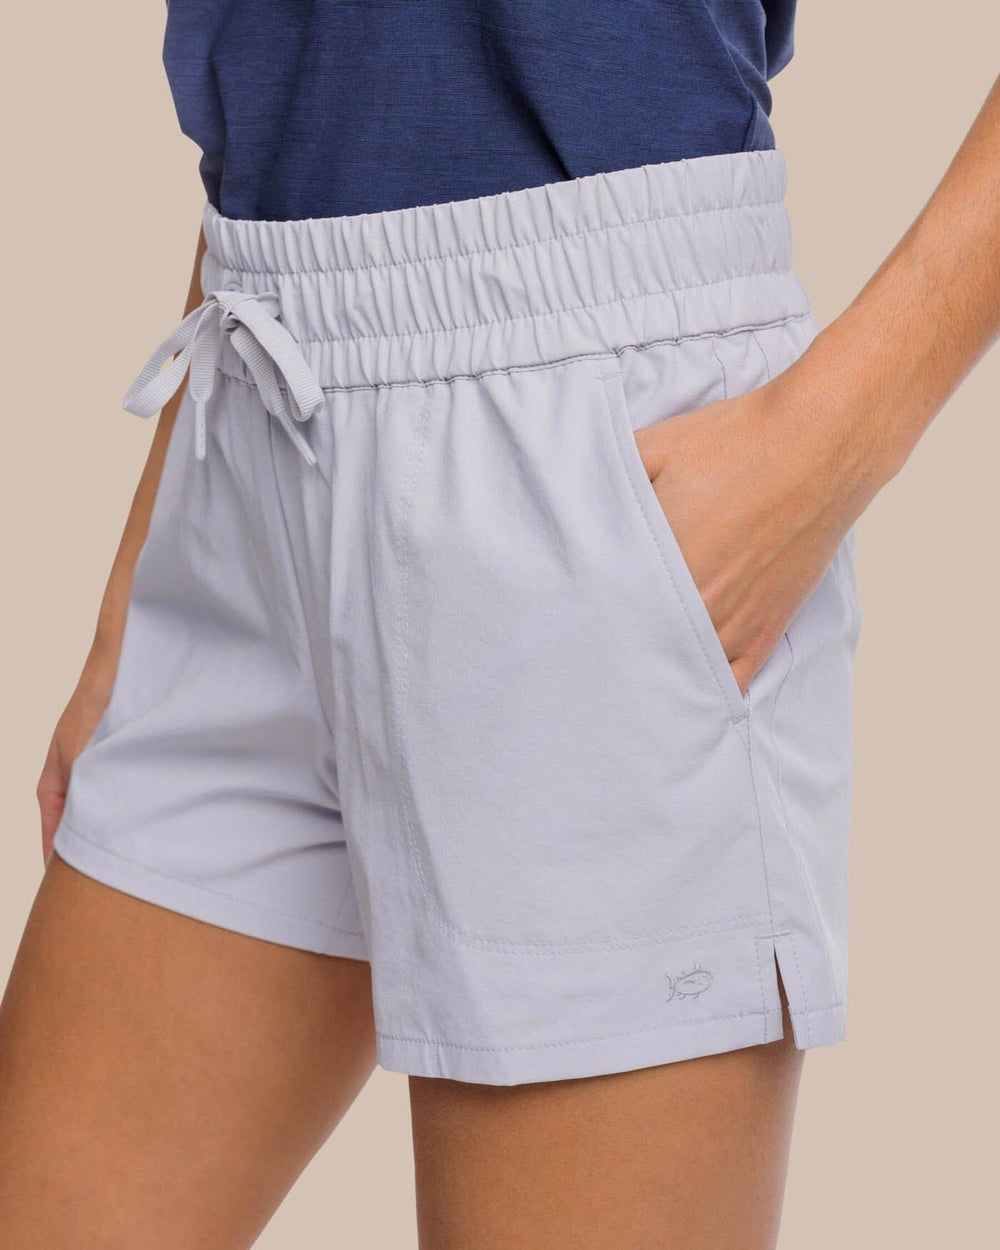 The detail view of the Southern Tide Neeley brrr Performance Short by Southern Tide - Platinum Grey